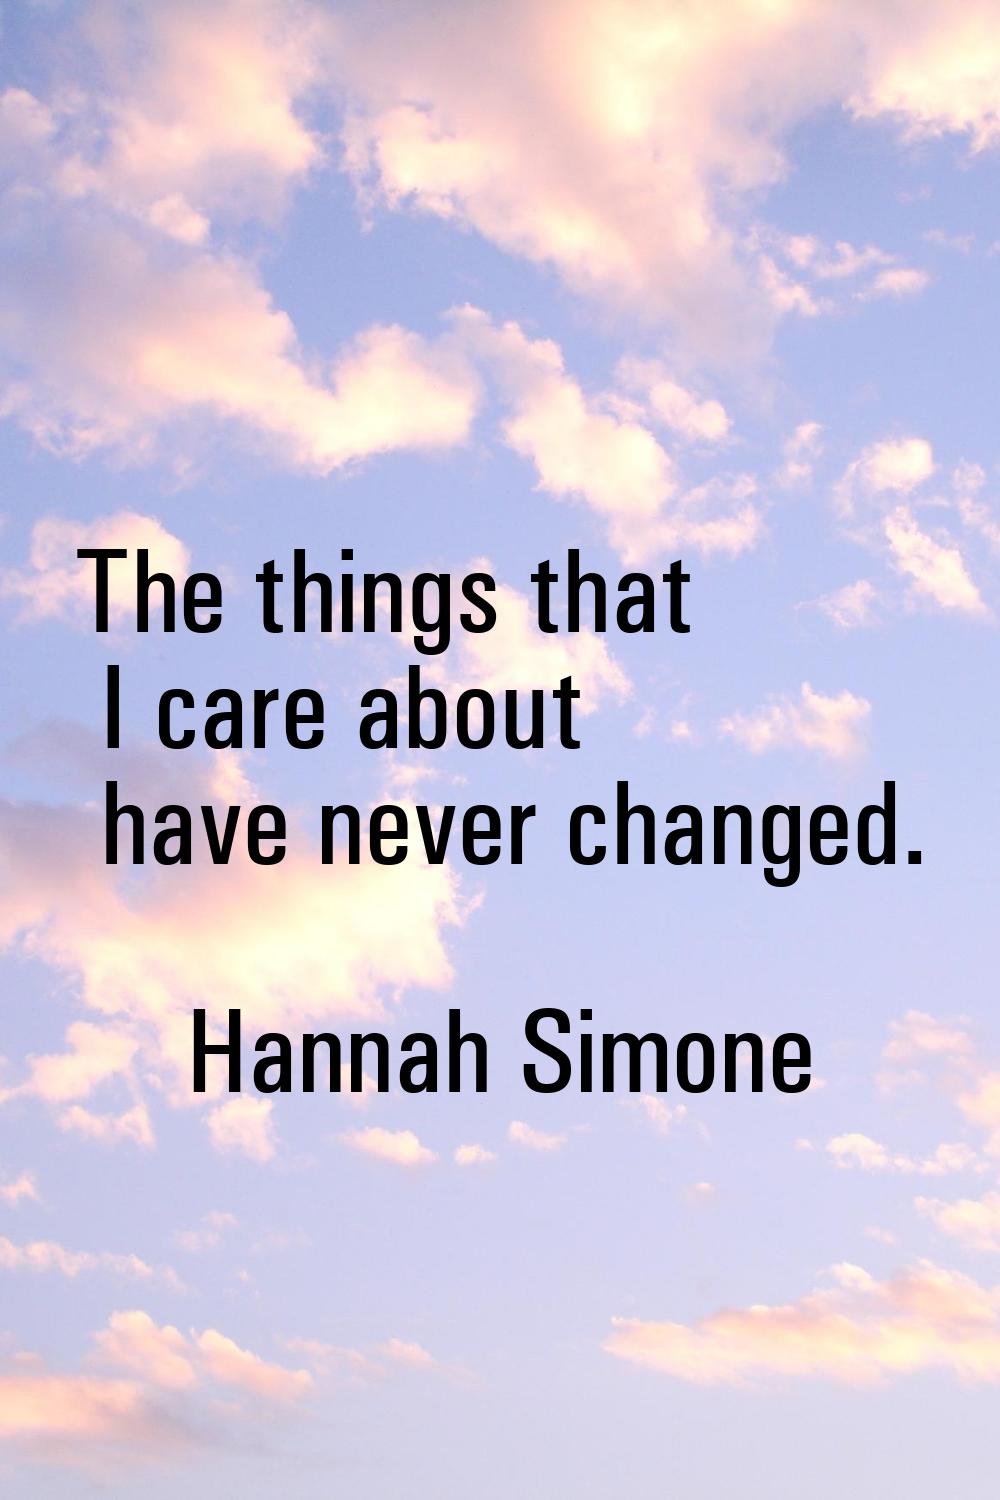 The things that I care about have never changed.